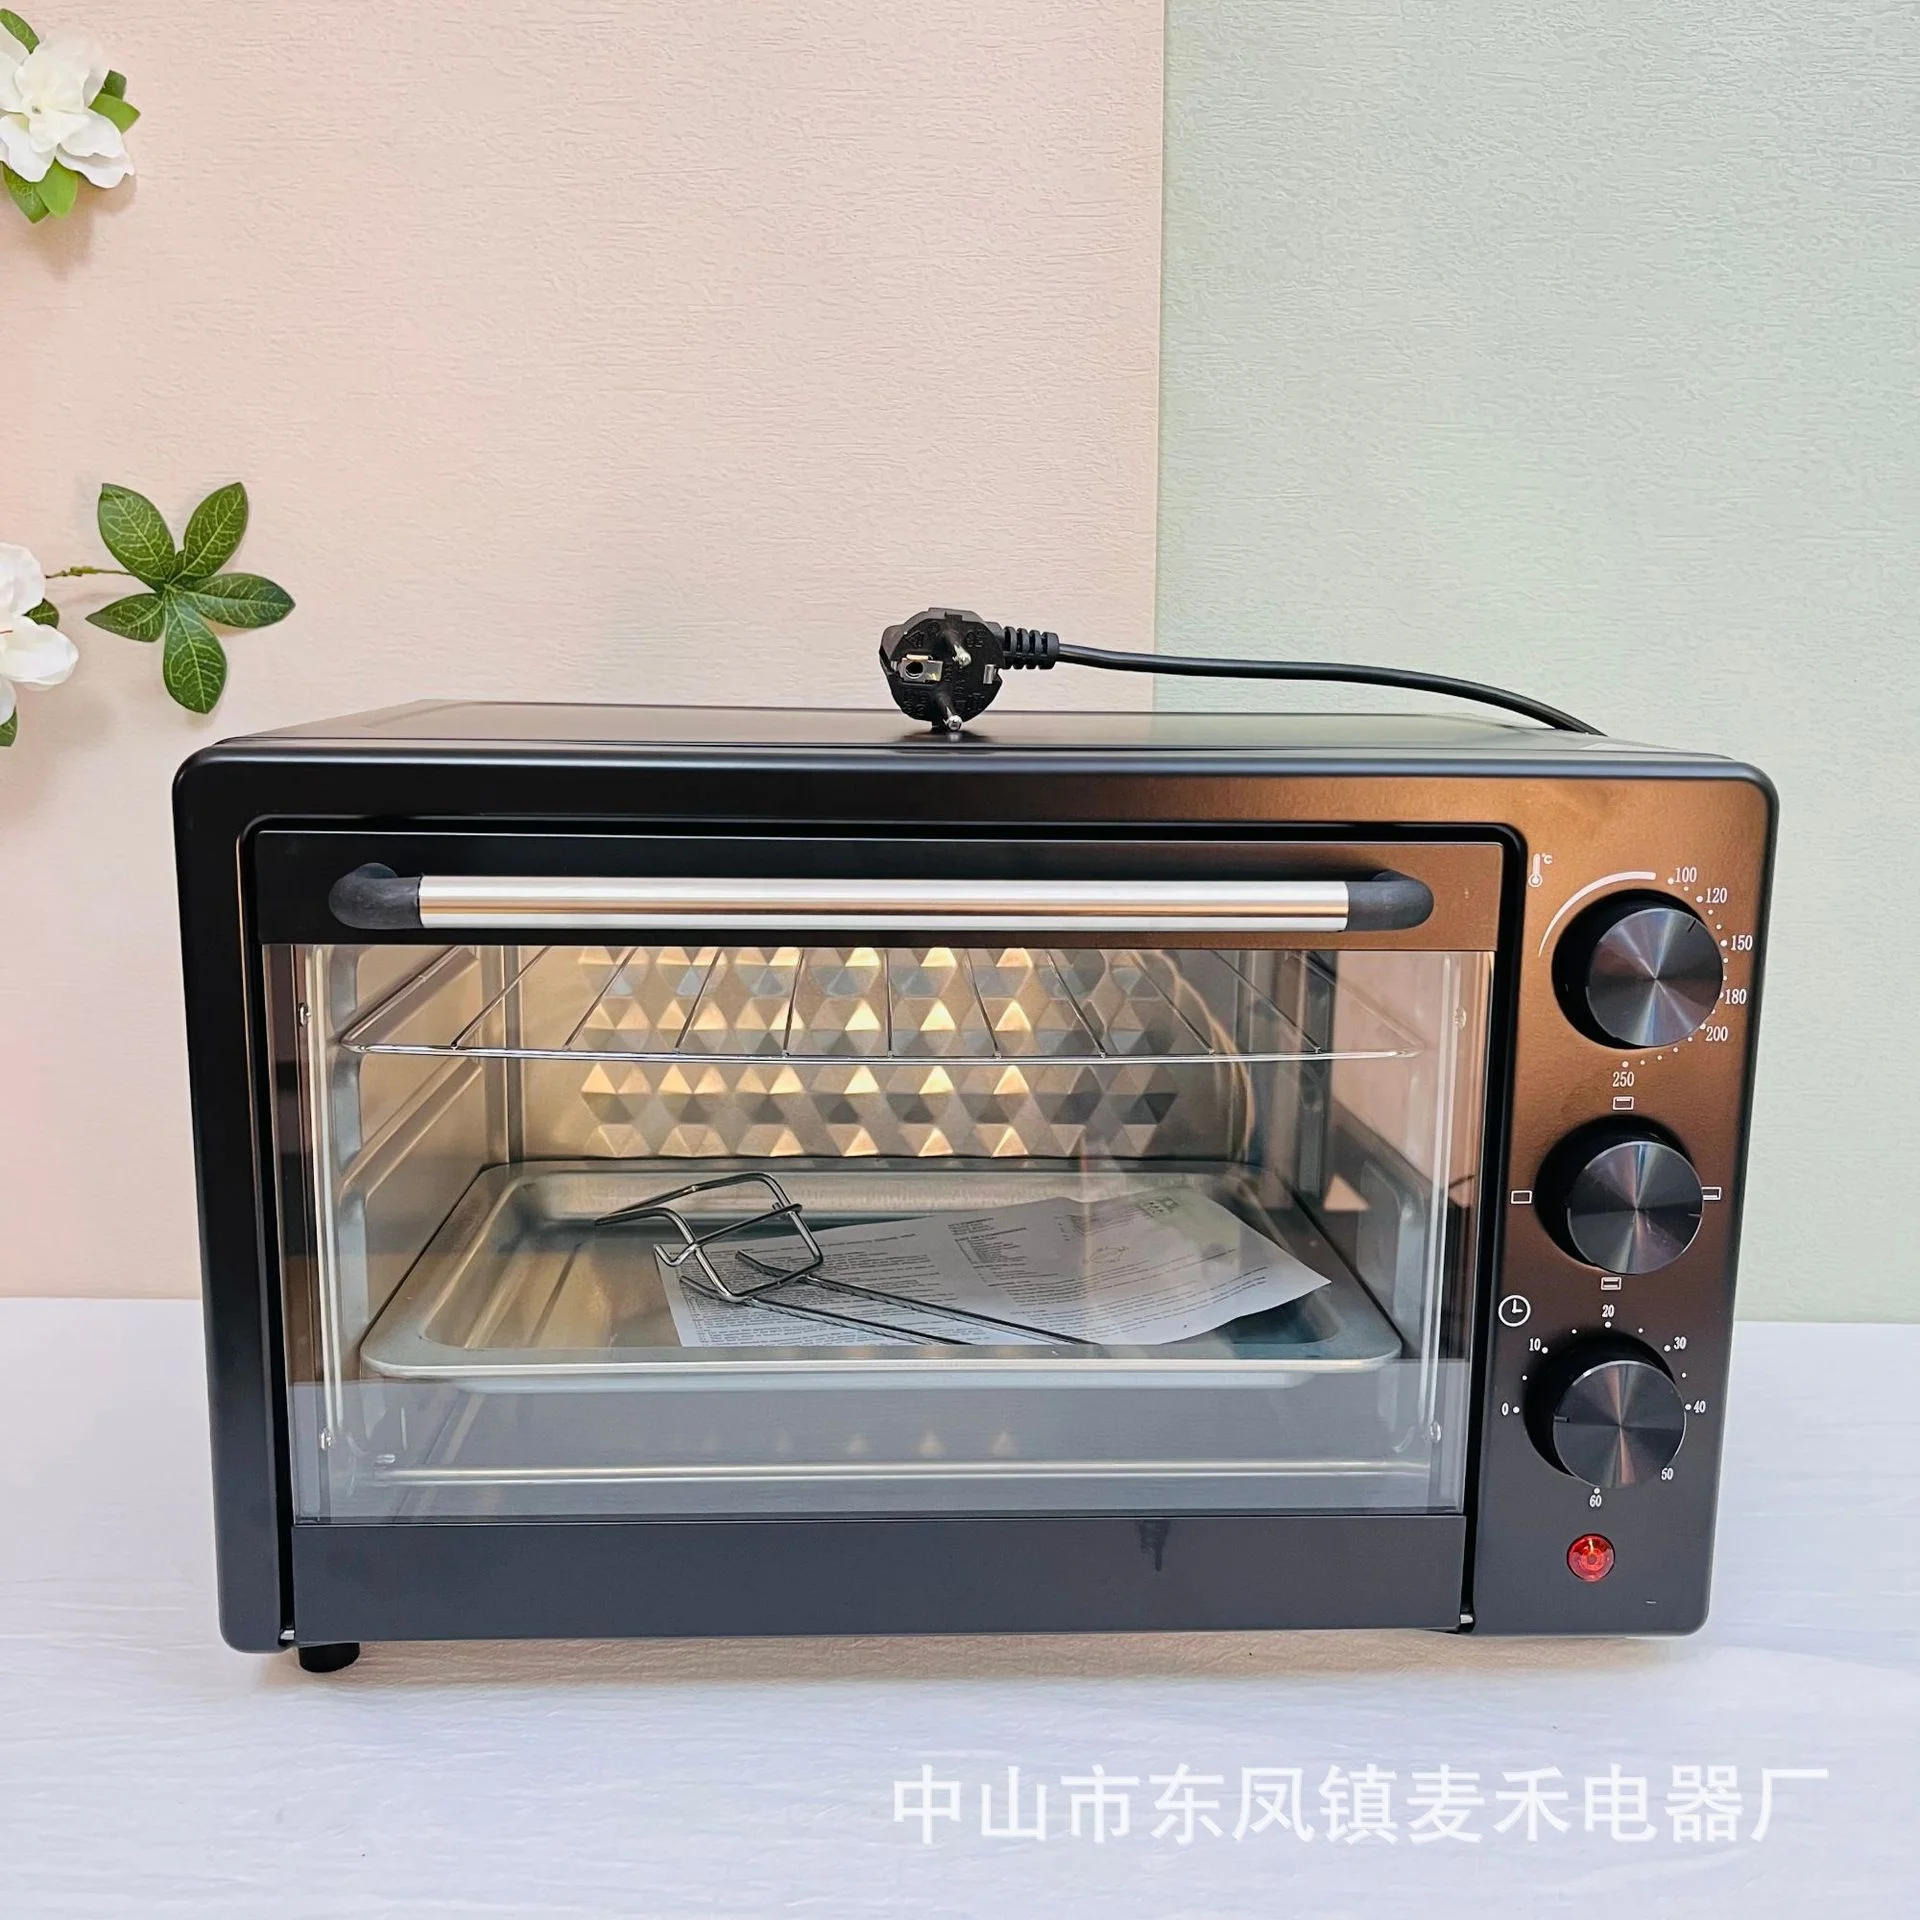 Large Size 100L Electric Toaster Oven Kitchen Appliance - China